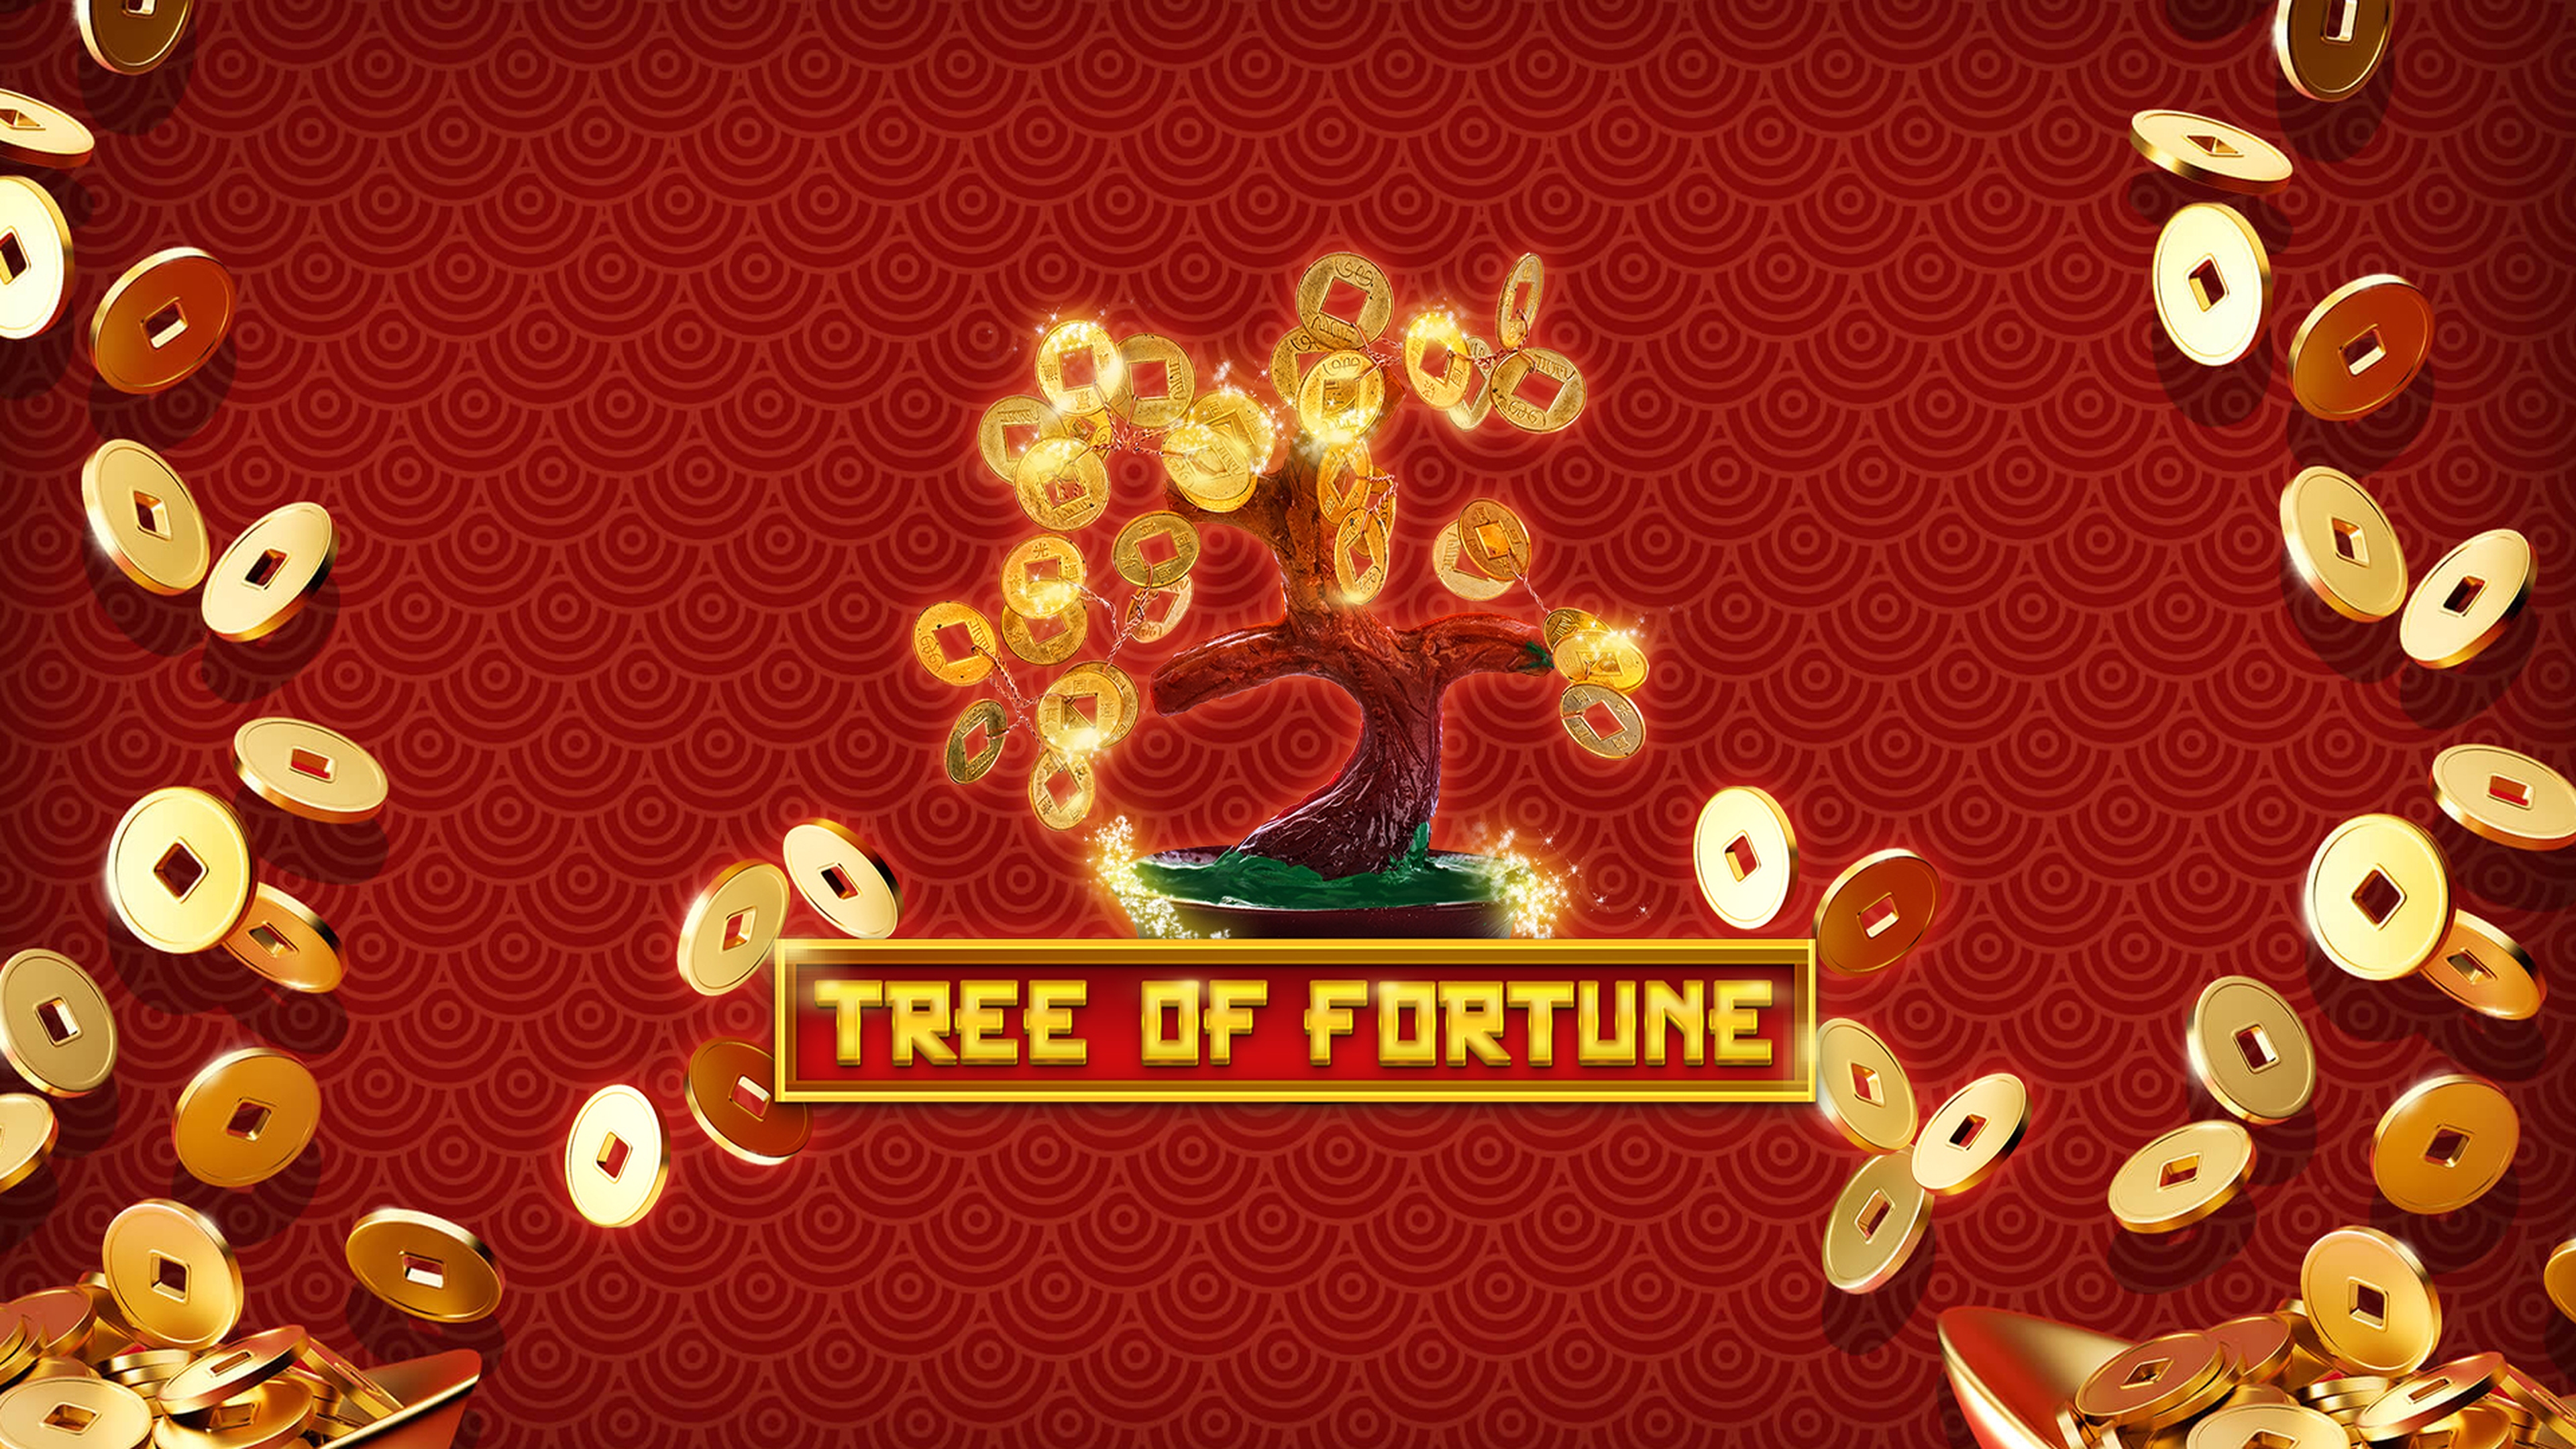 Tree of Fortune demo